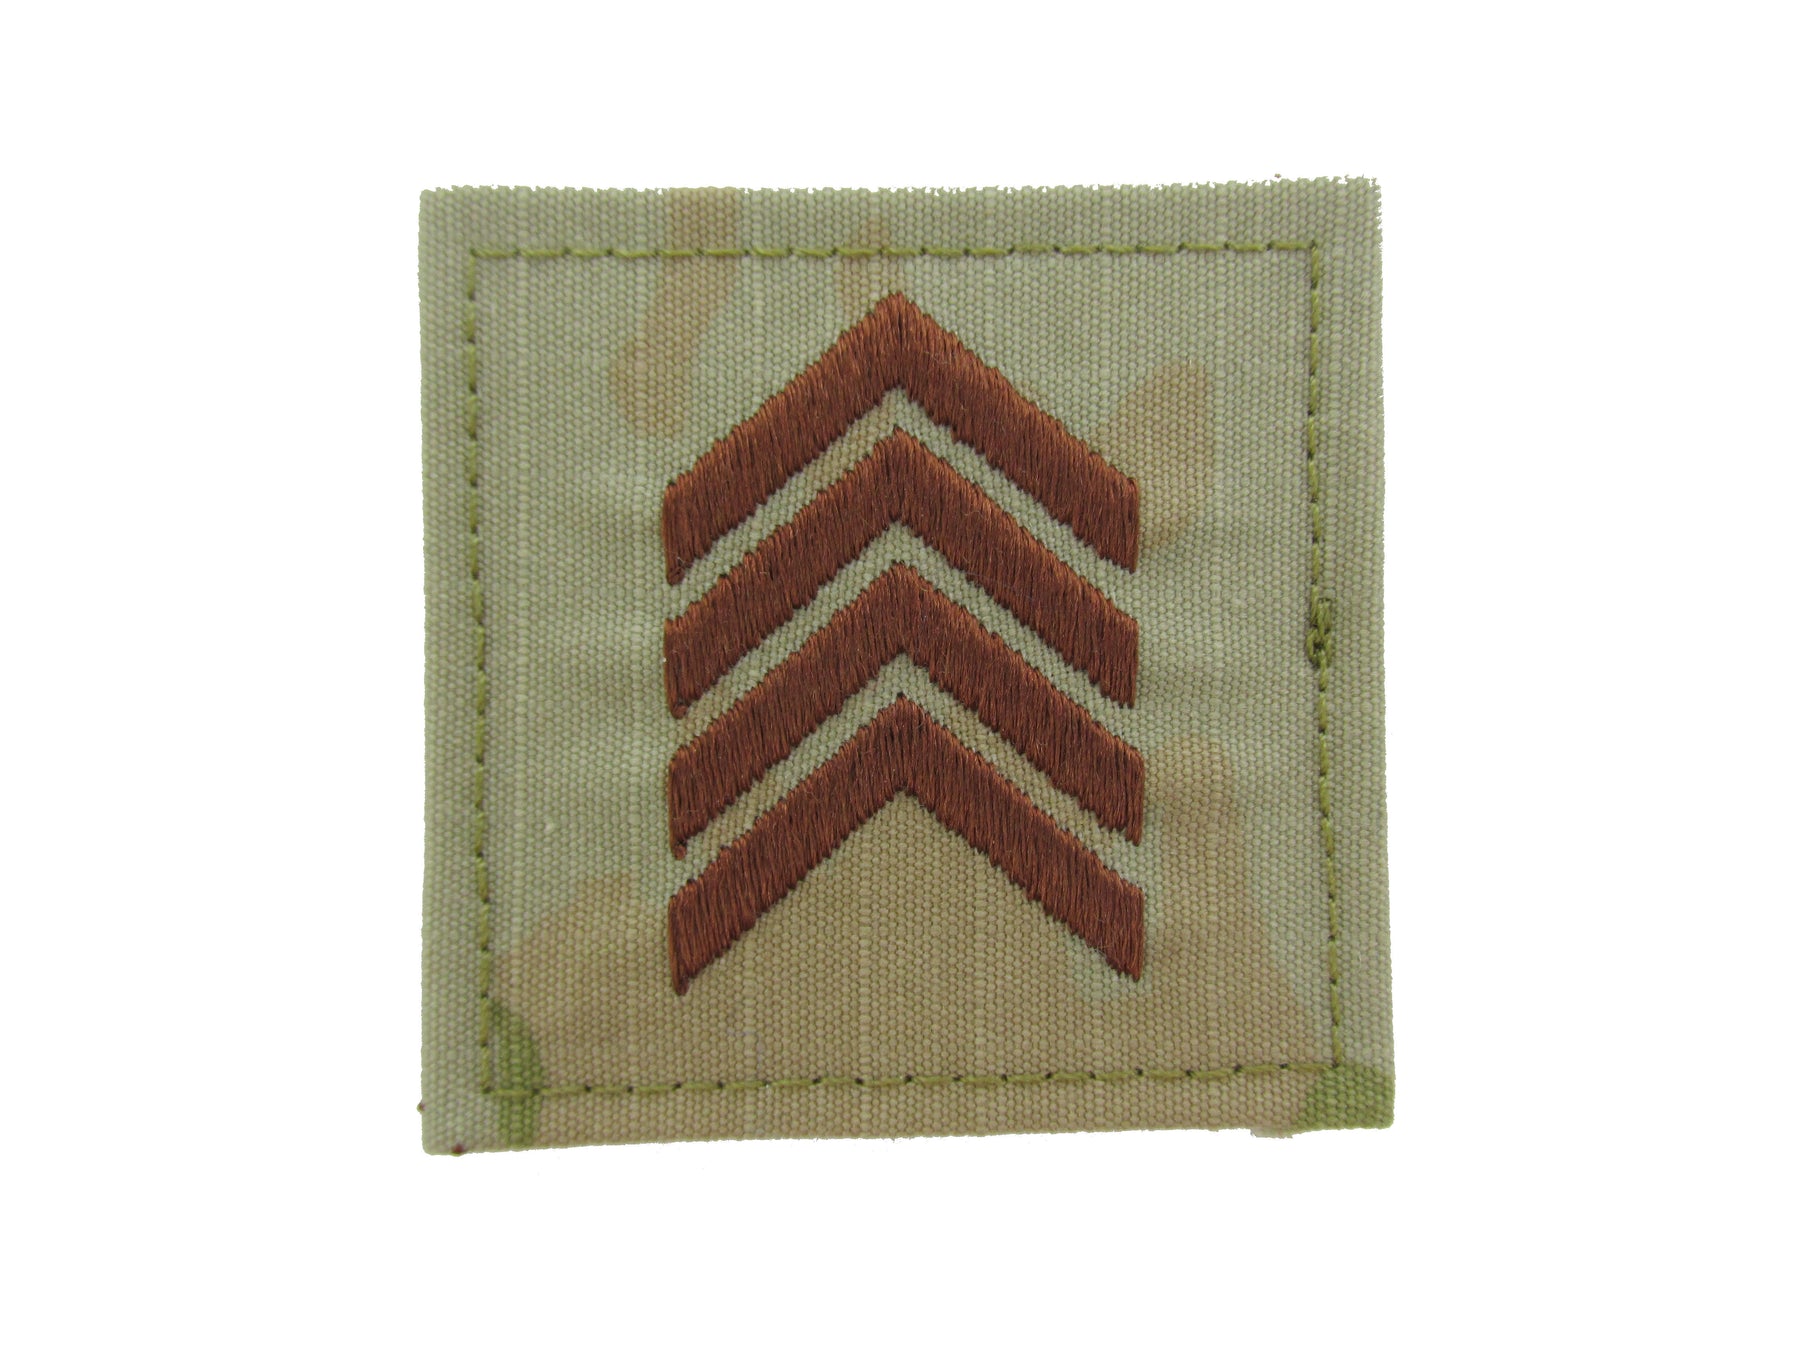 Air Force Academy OCP Rank with Hook - Spice Brown